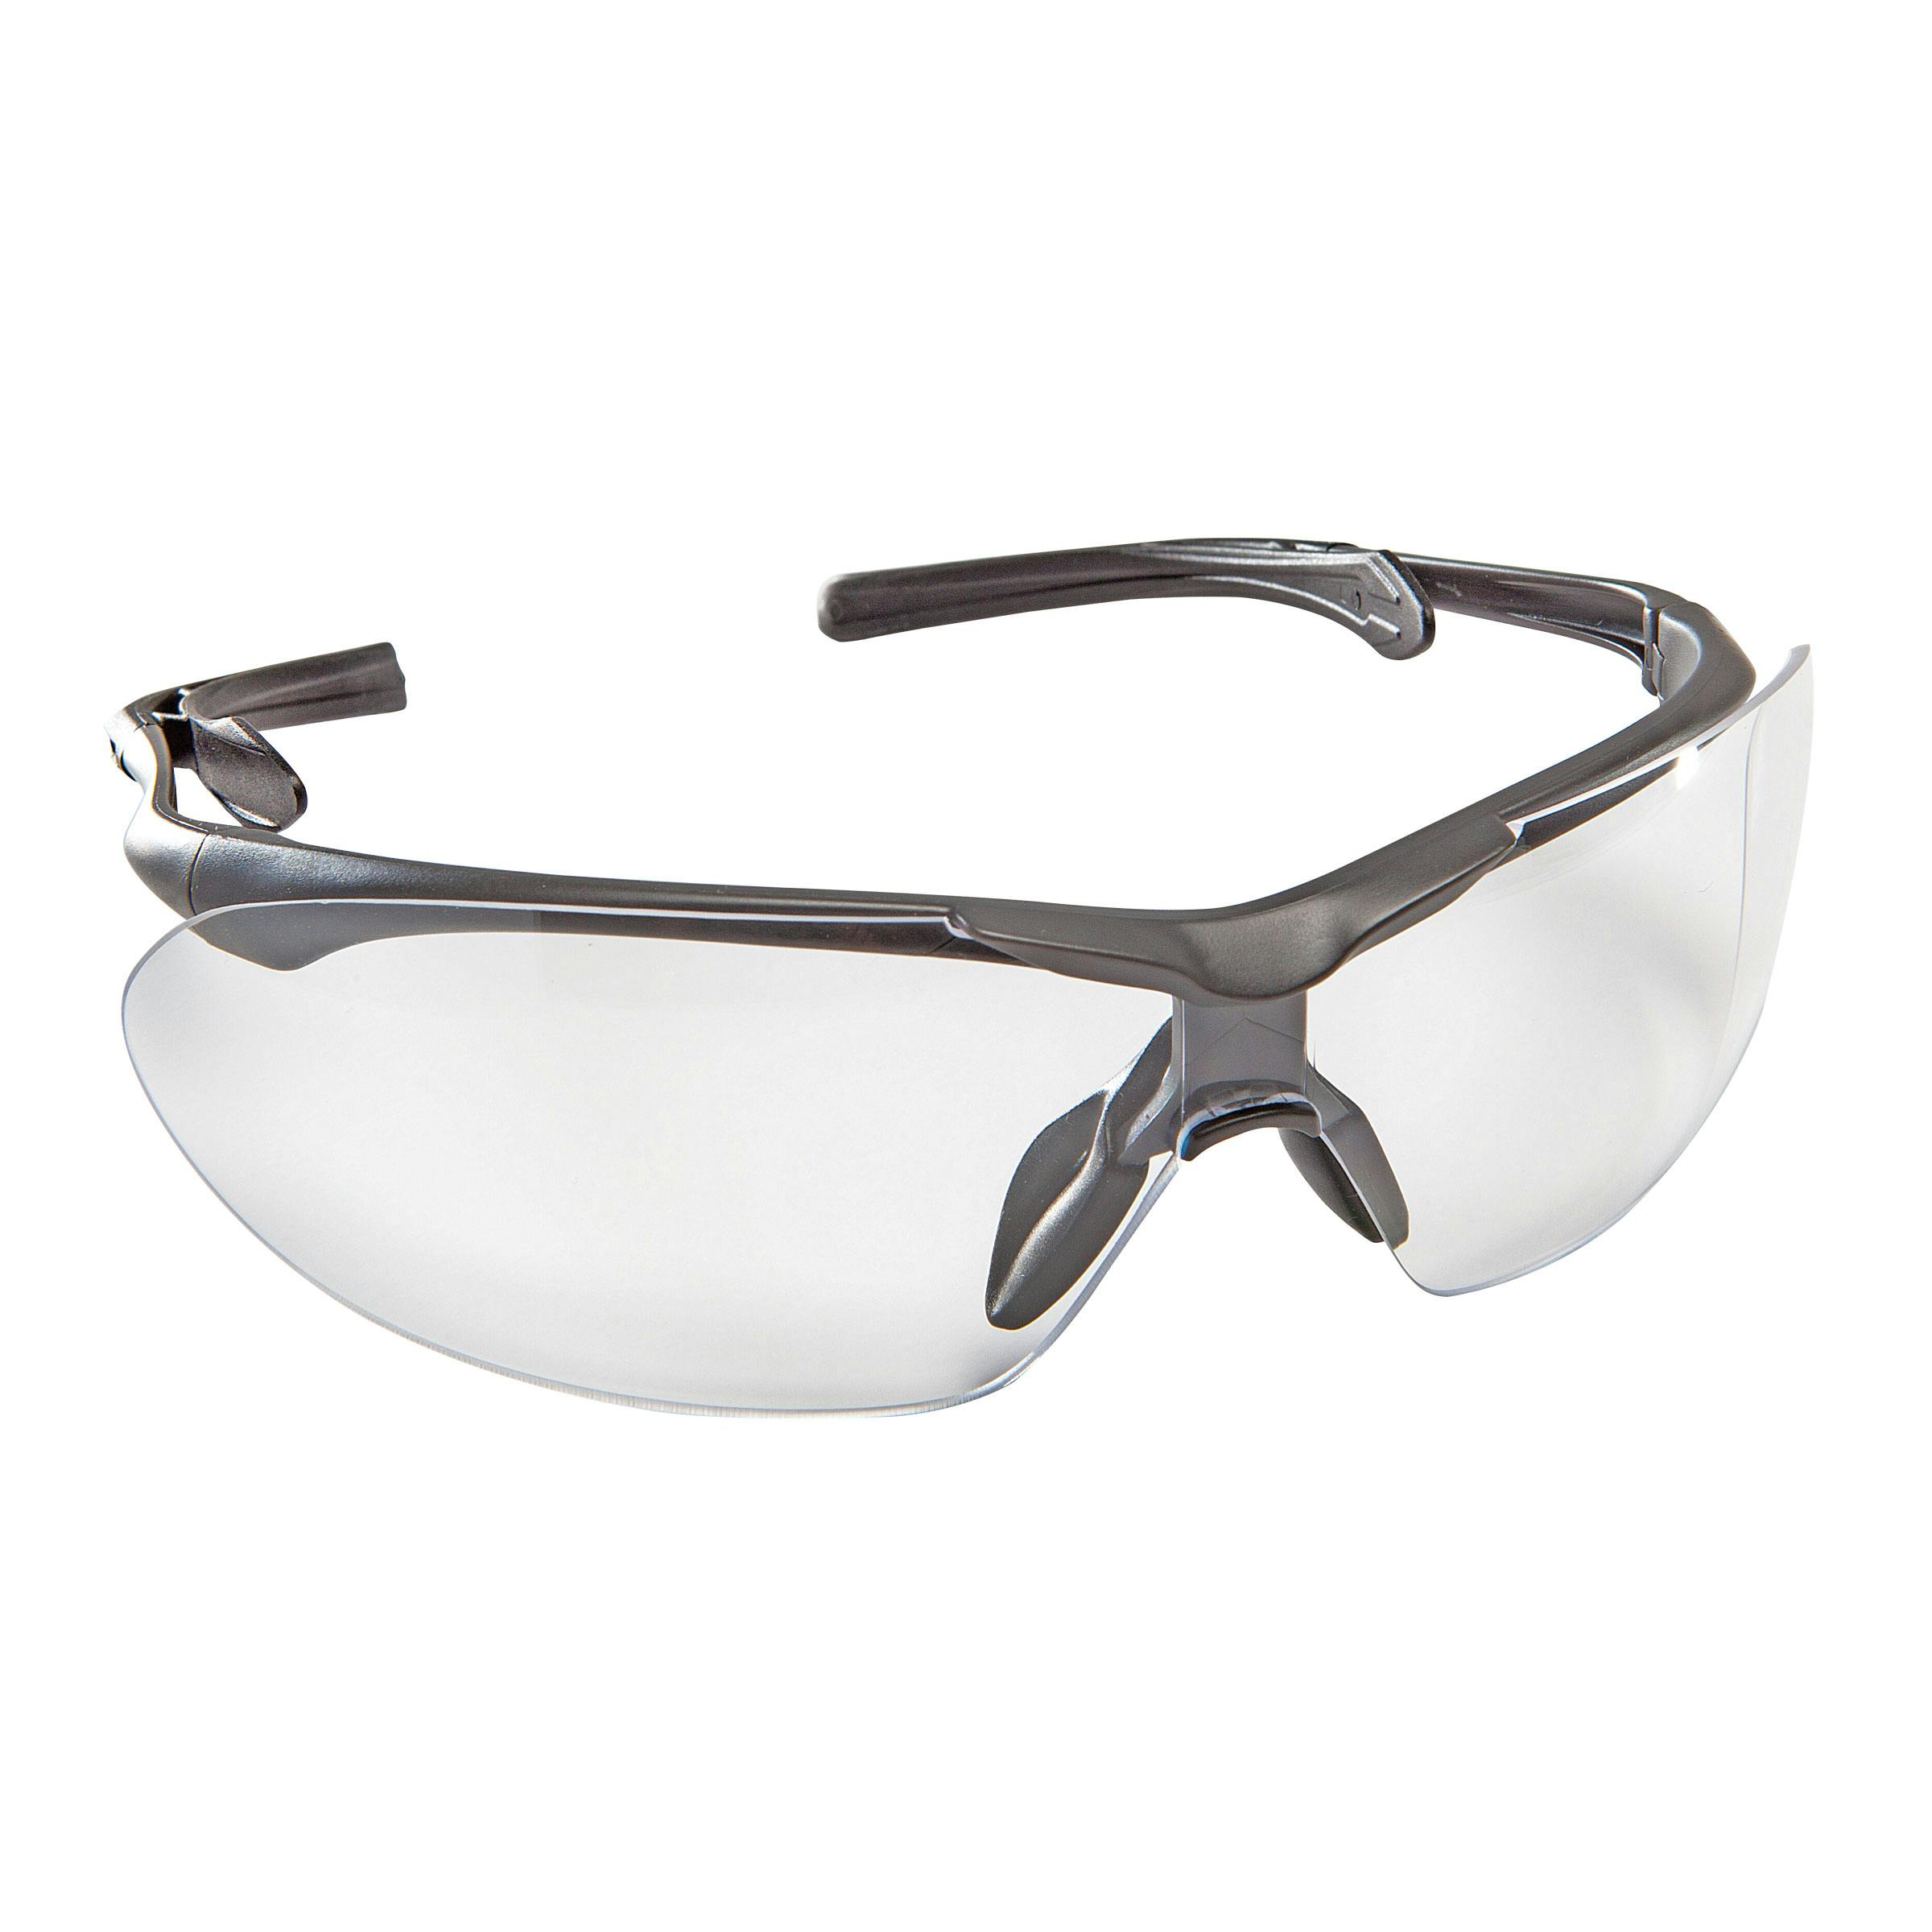 Force360 Eyefit Safety Spectacle